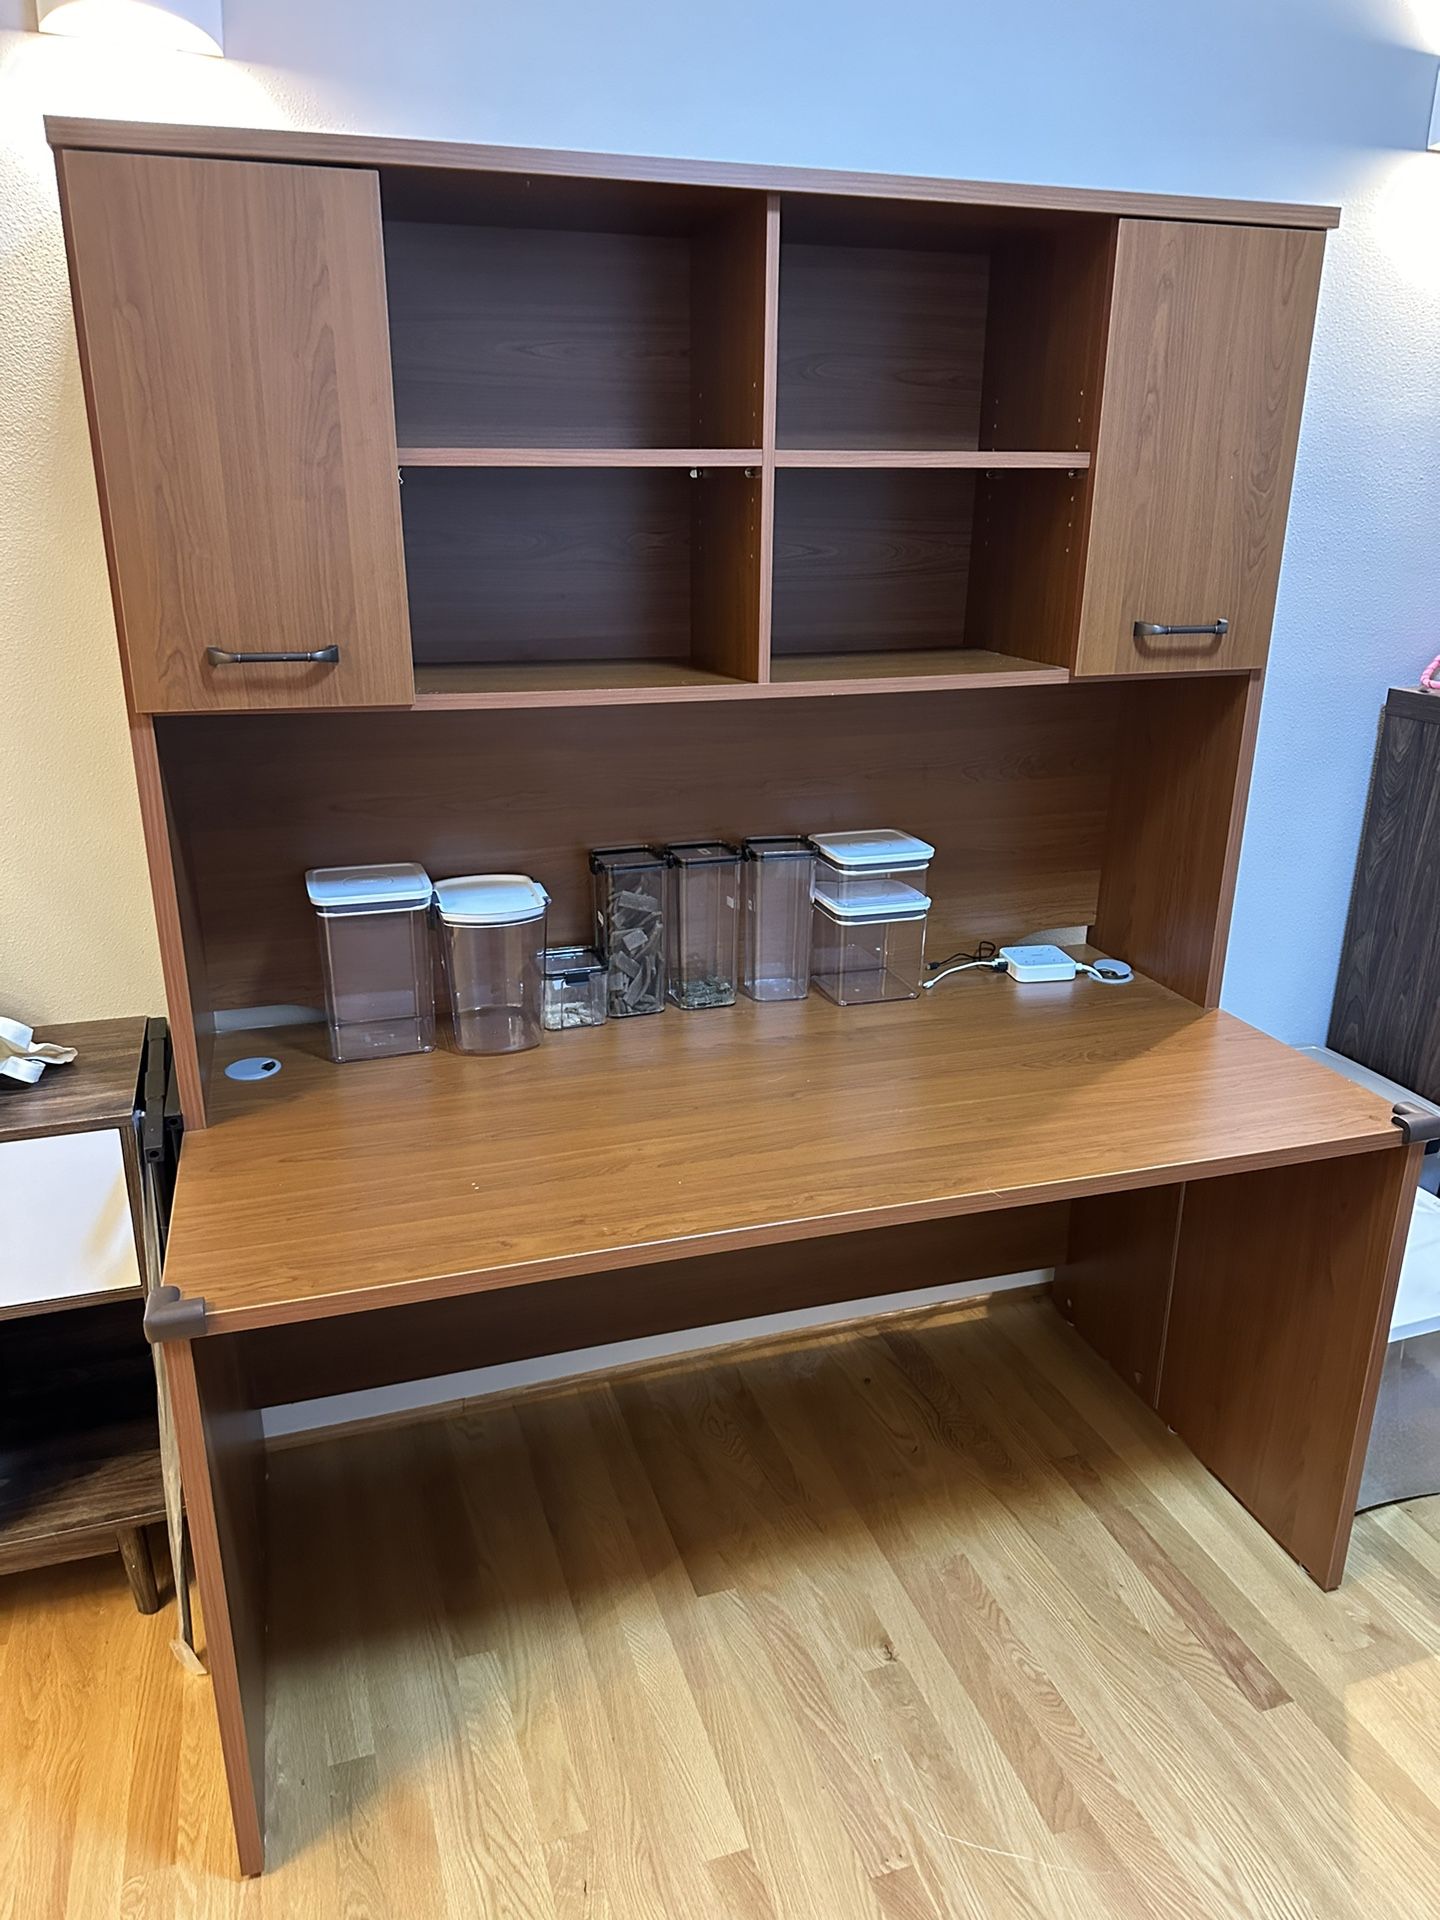 FOR FREE!!! High Quality Wood desk with Storage